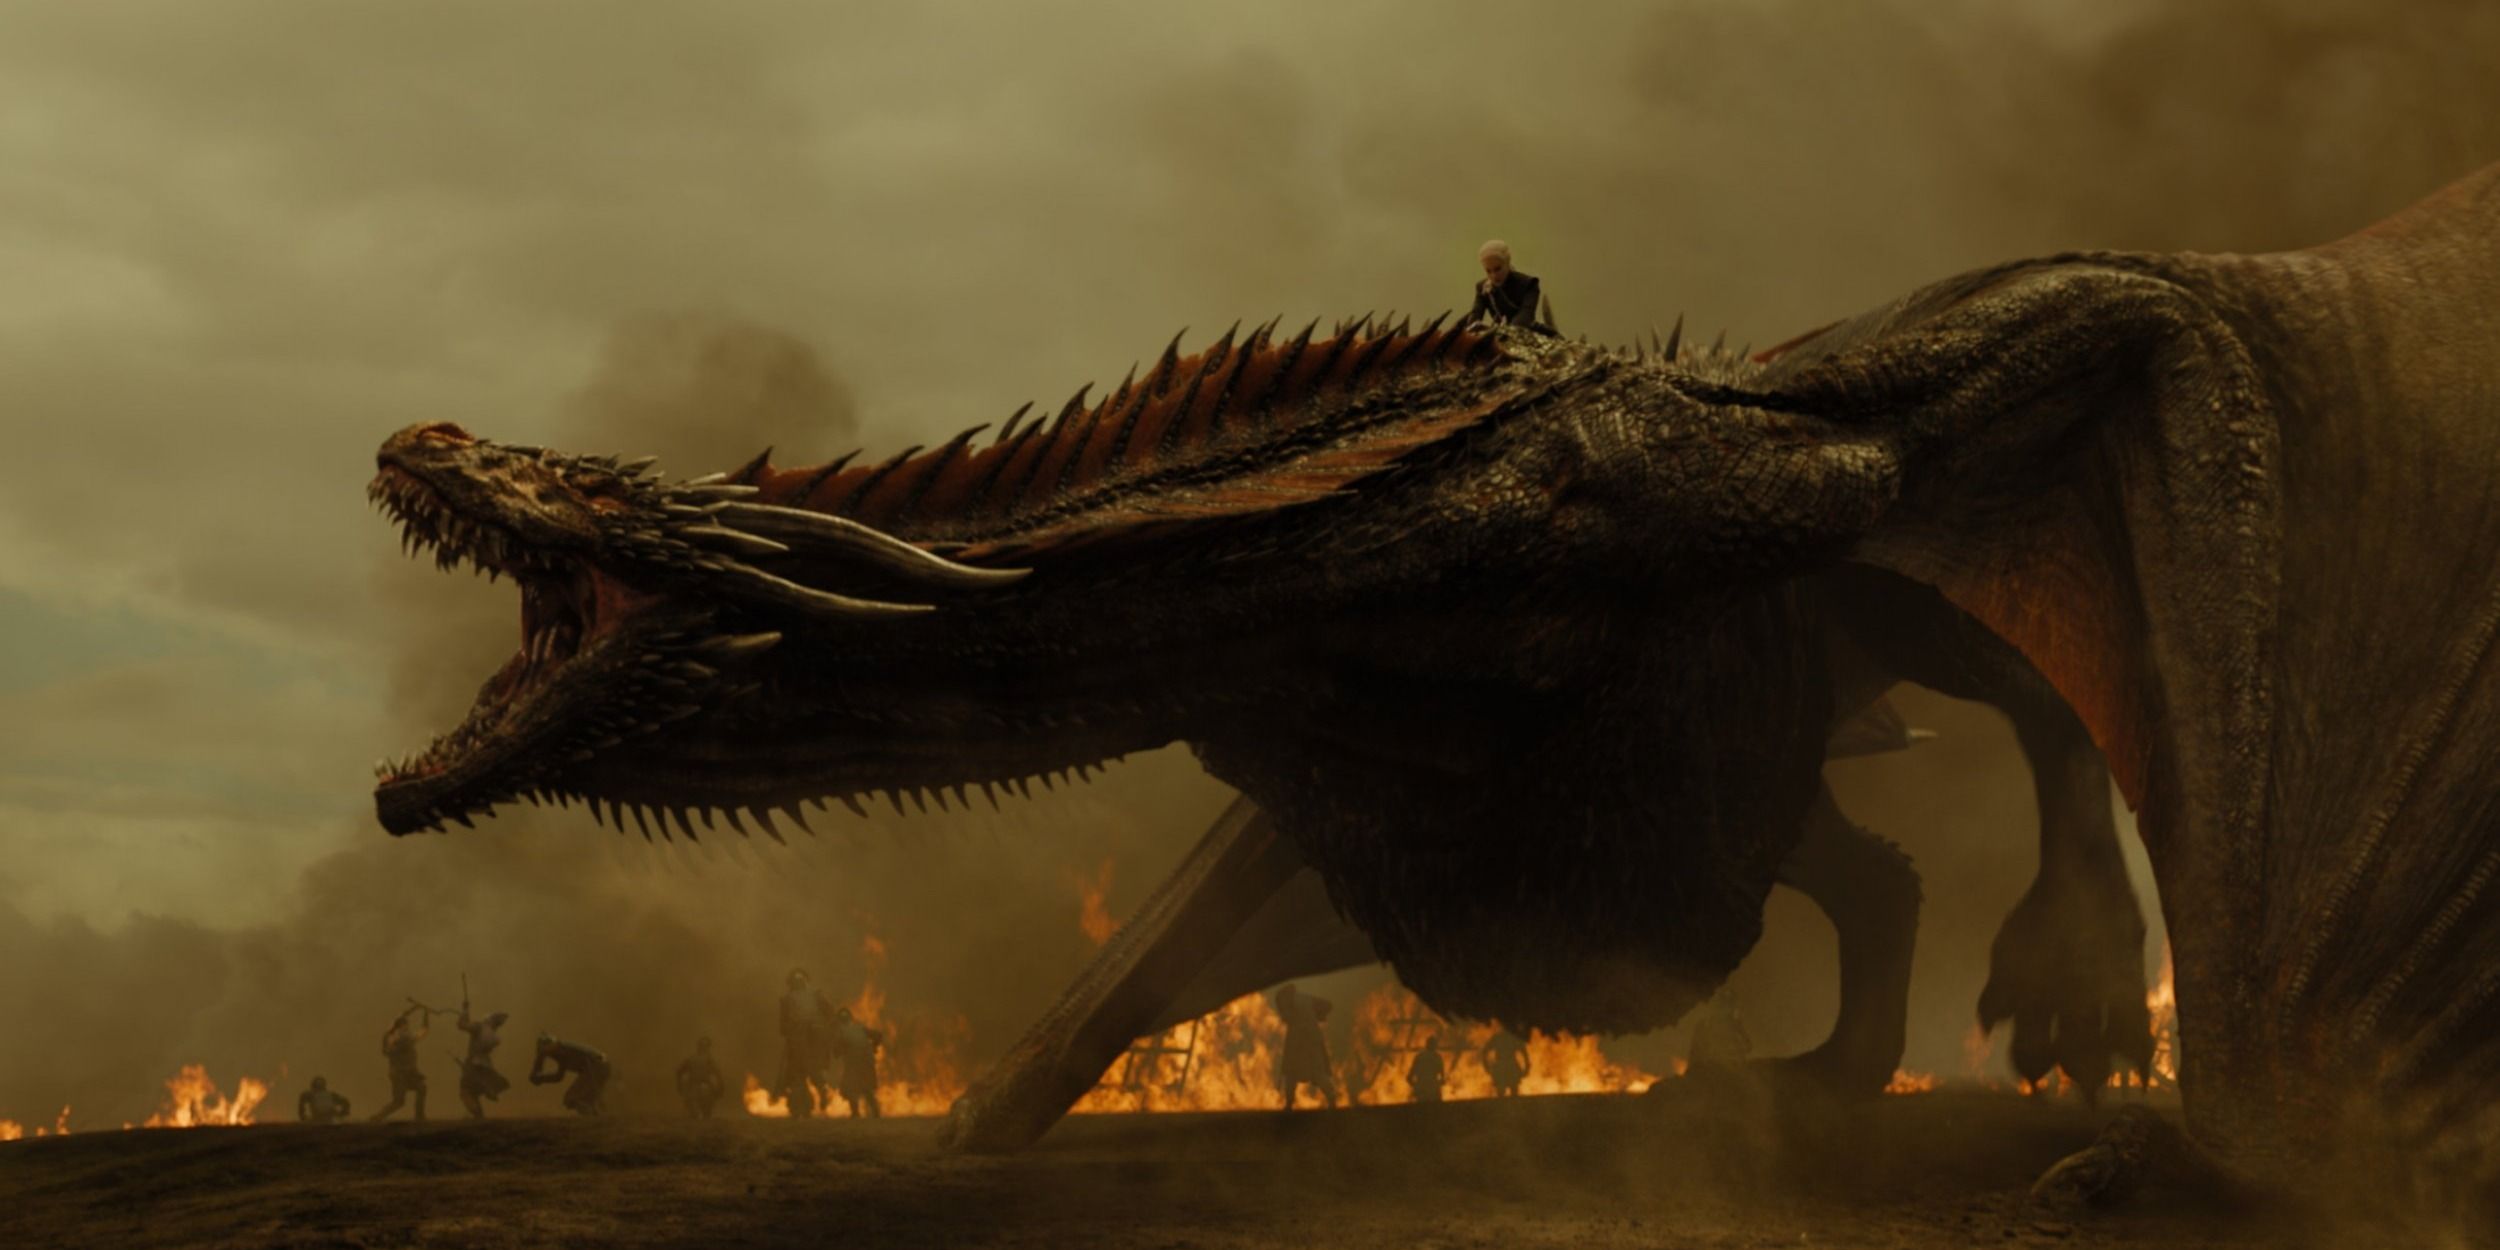 Game of Thrones 10 Biggest Ways Daenerys Changed From Season 1 To The Finale